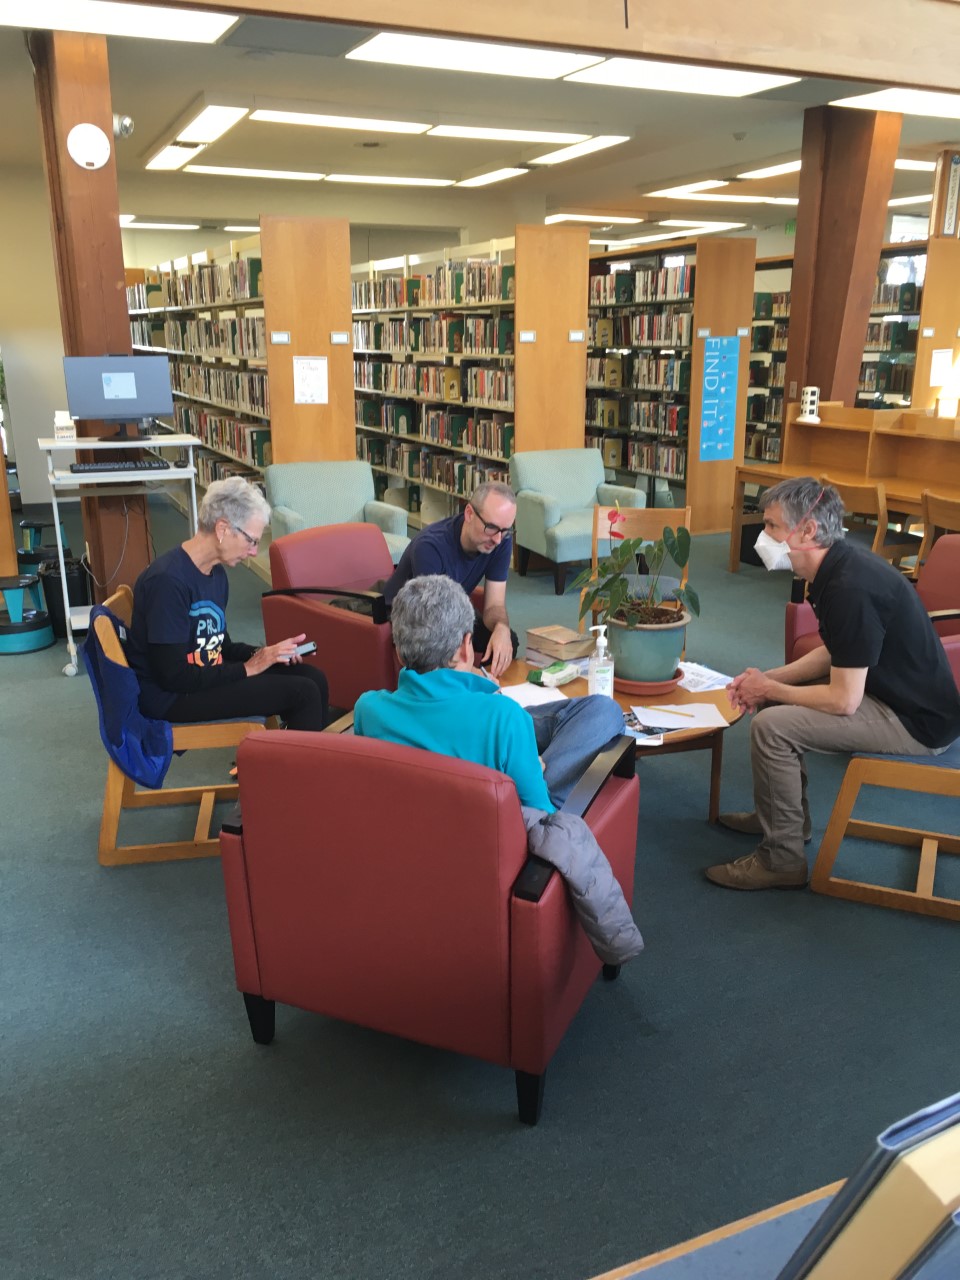 Spanglish group (two women, two men) conversing in library